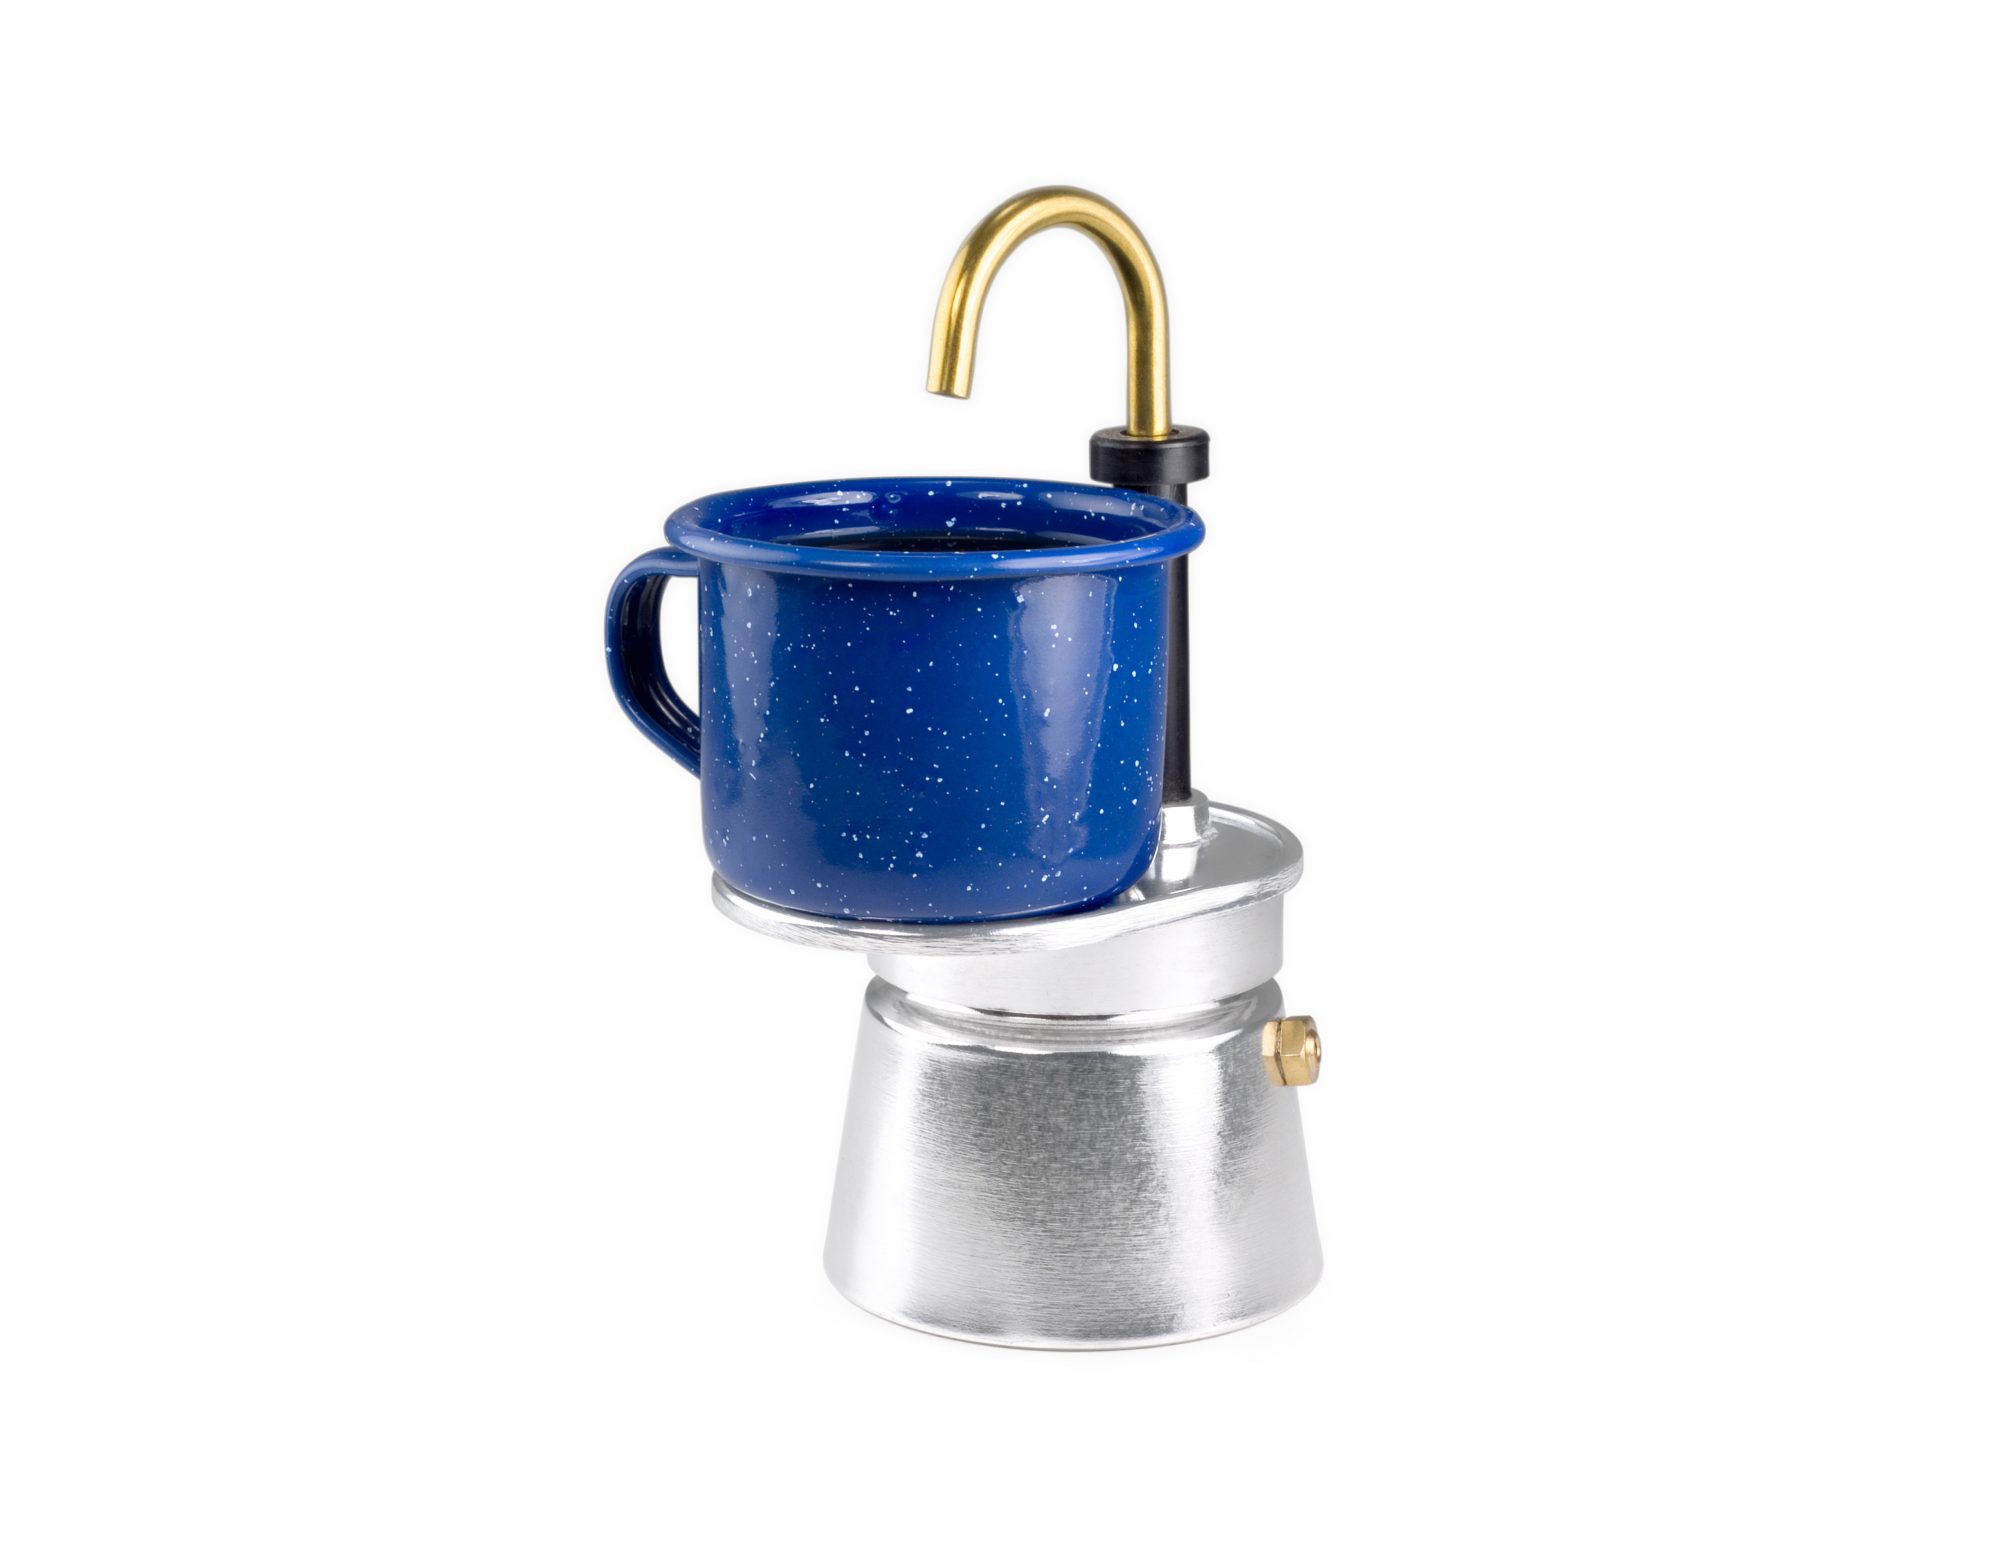 EC: This Camping Espresso Maker Is a Genius Kitchen Space-Saver